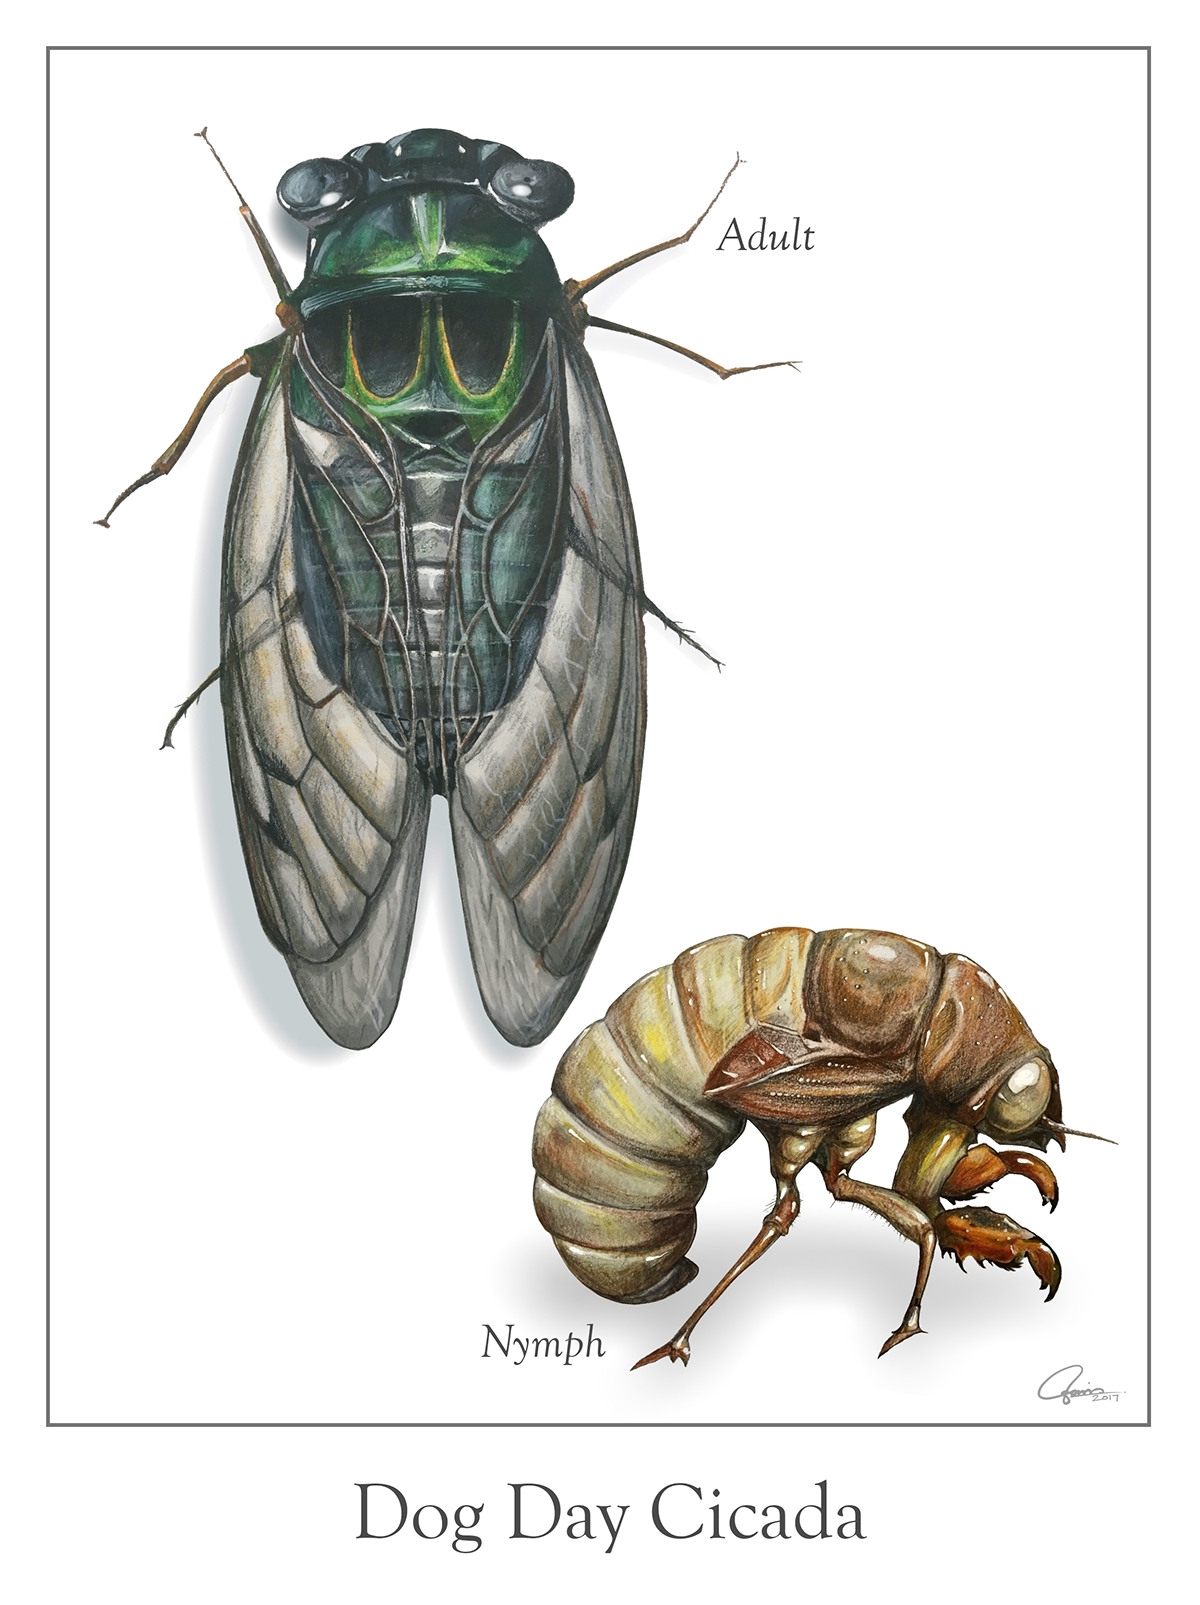 Insects scientific illustration biological illustration science Nature Museum Studies